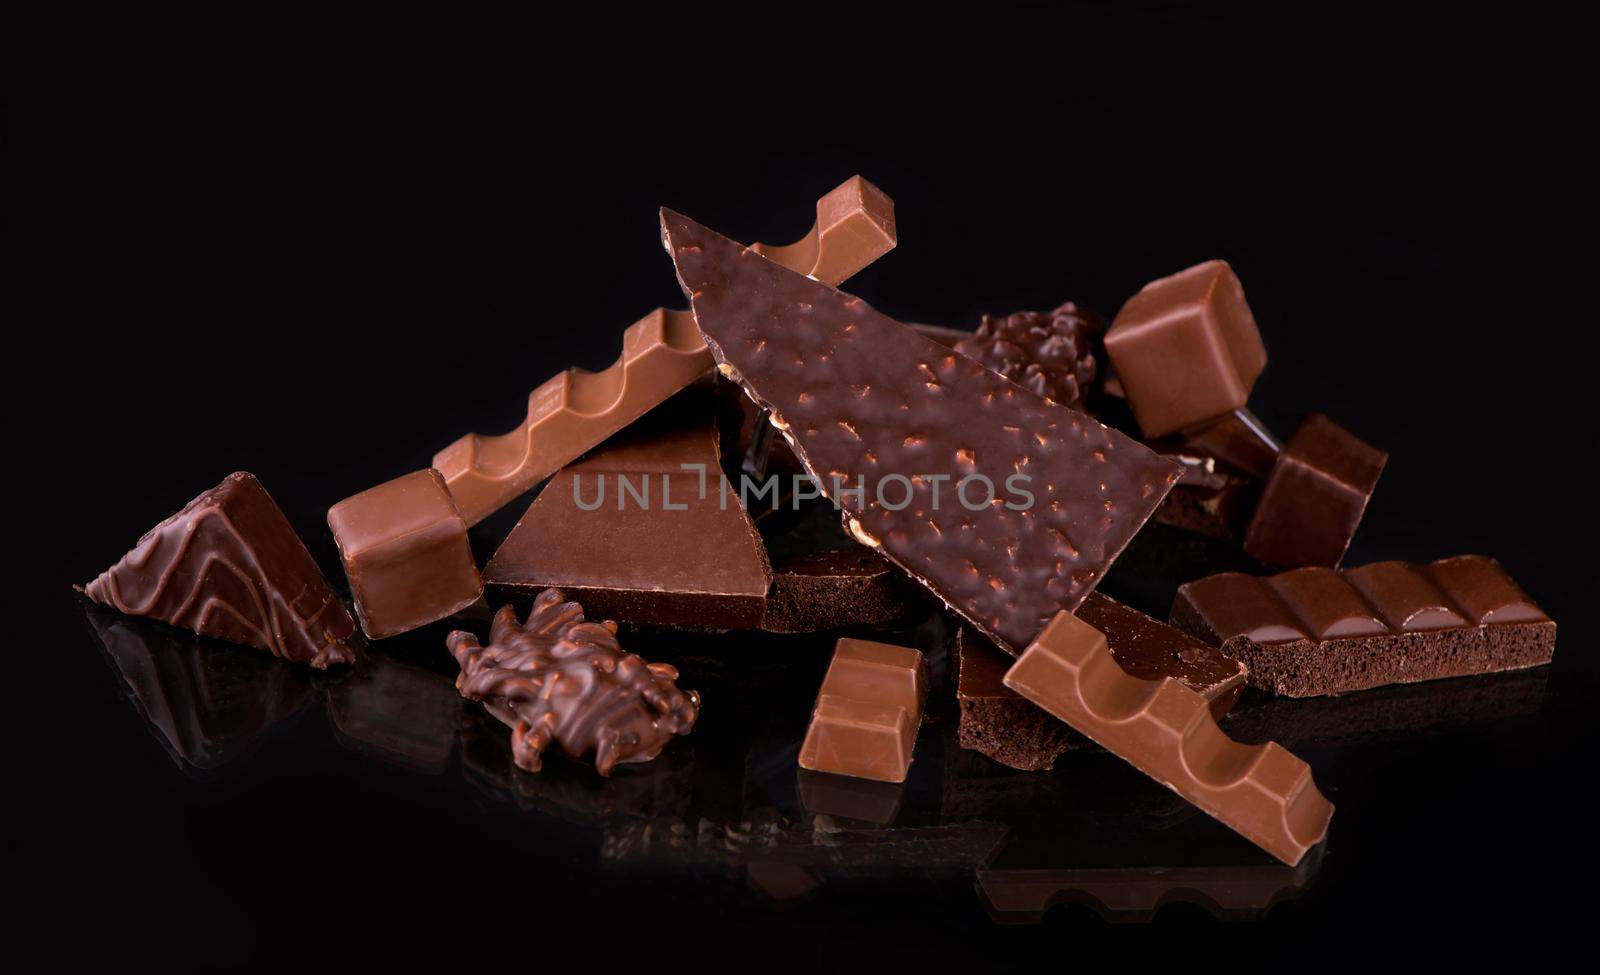 chocolate pieces and cocoa powder on wooden background by aprilphoto